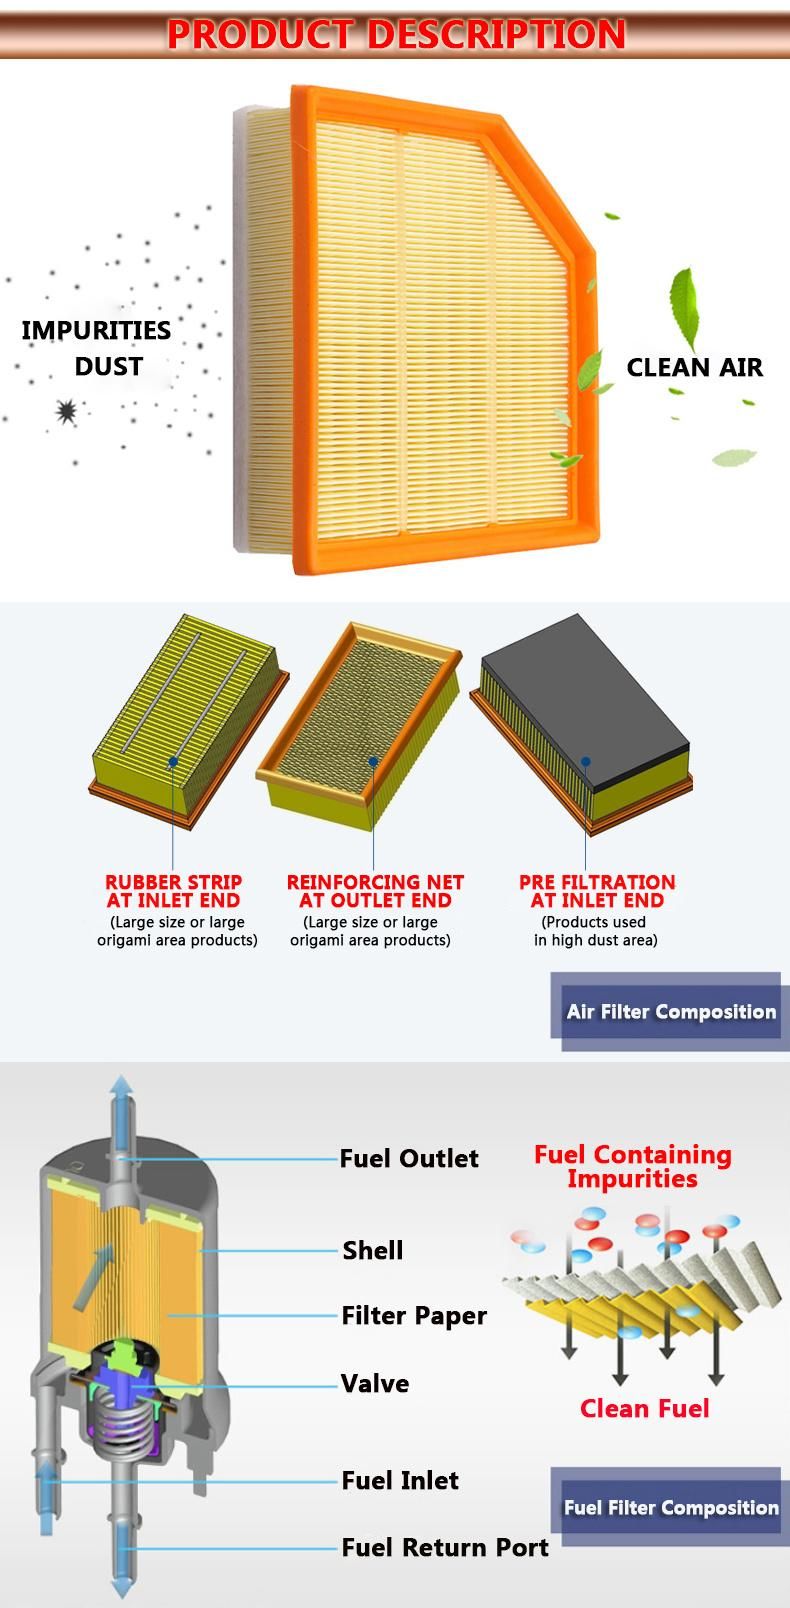 Gdst High Performance Purifier Replacement Car Air Filters